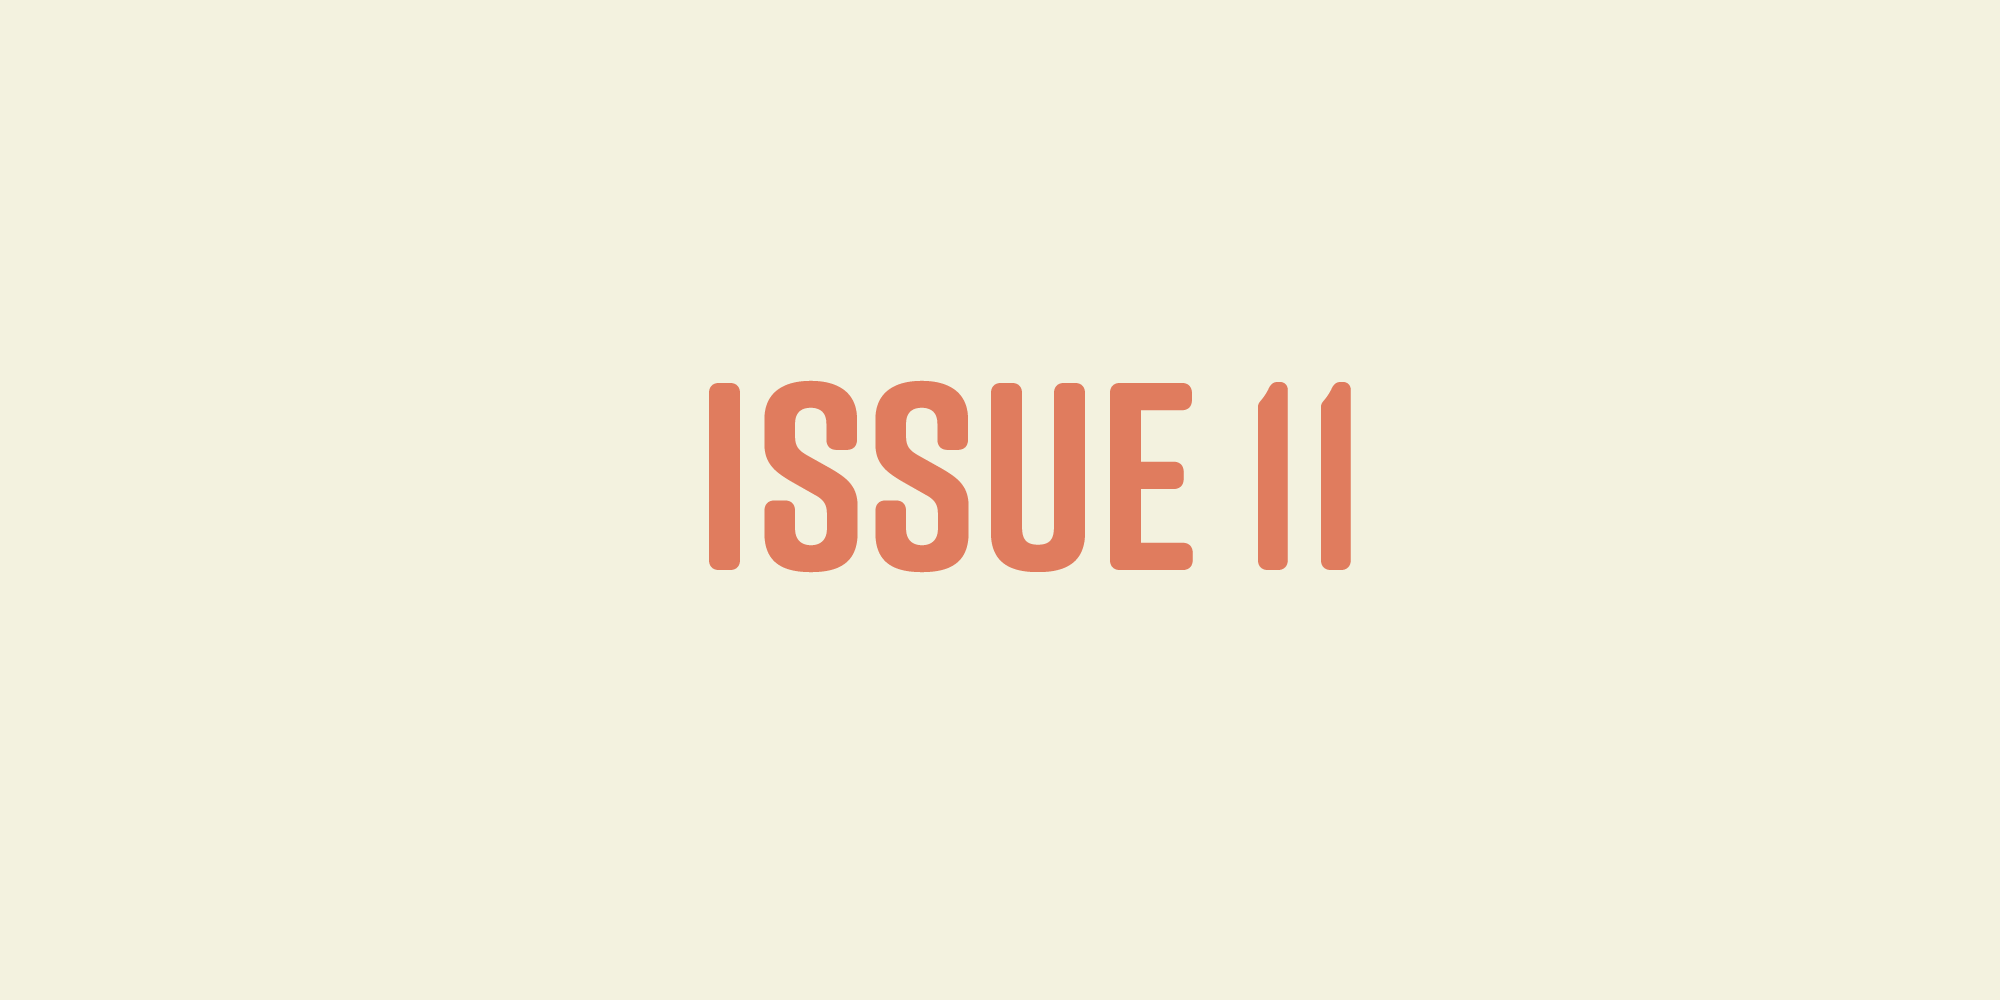 Issue 11